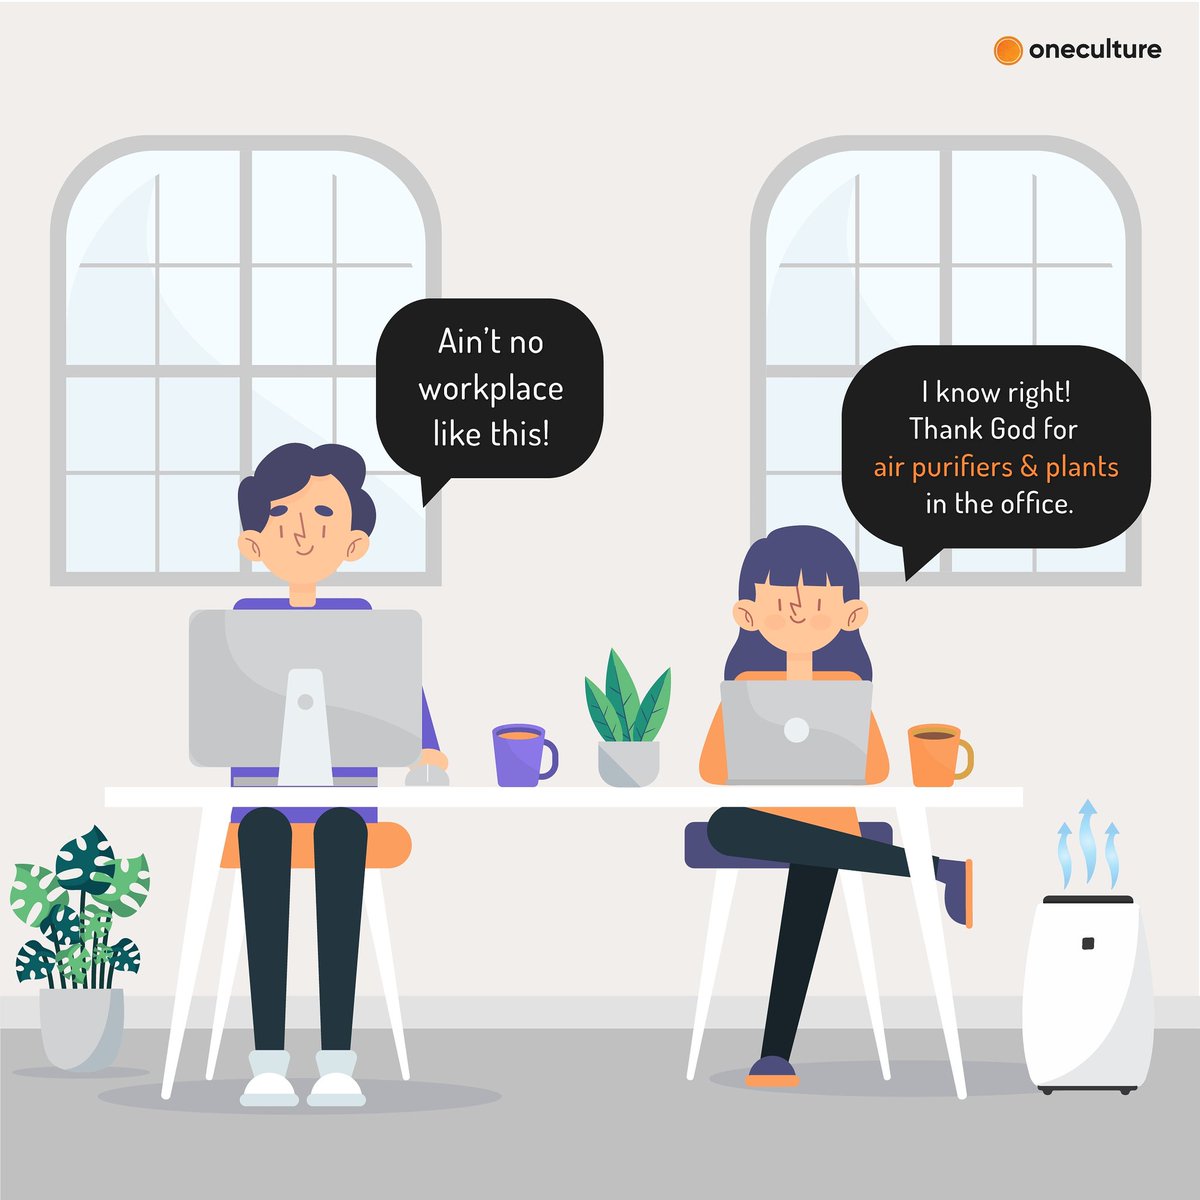 End your week on a fresh note.
Studies show, breathing pure air can reduce fatigue by almost half. 

#delhipollution #delhiairquality #healthtips #coworkinglife #coworkingspaces #healthyworkspaces  #wellness #airpurifiers #antipollution #greenoffice #worklifebalance #OneCulture